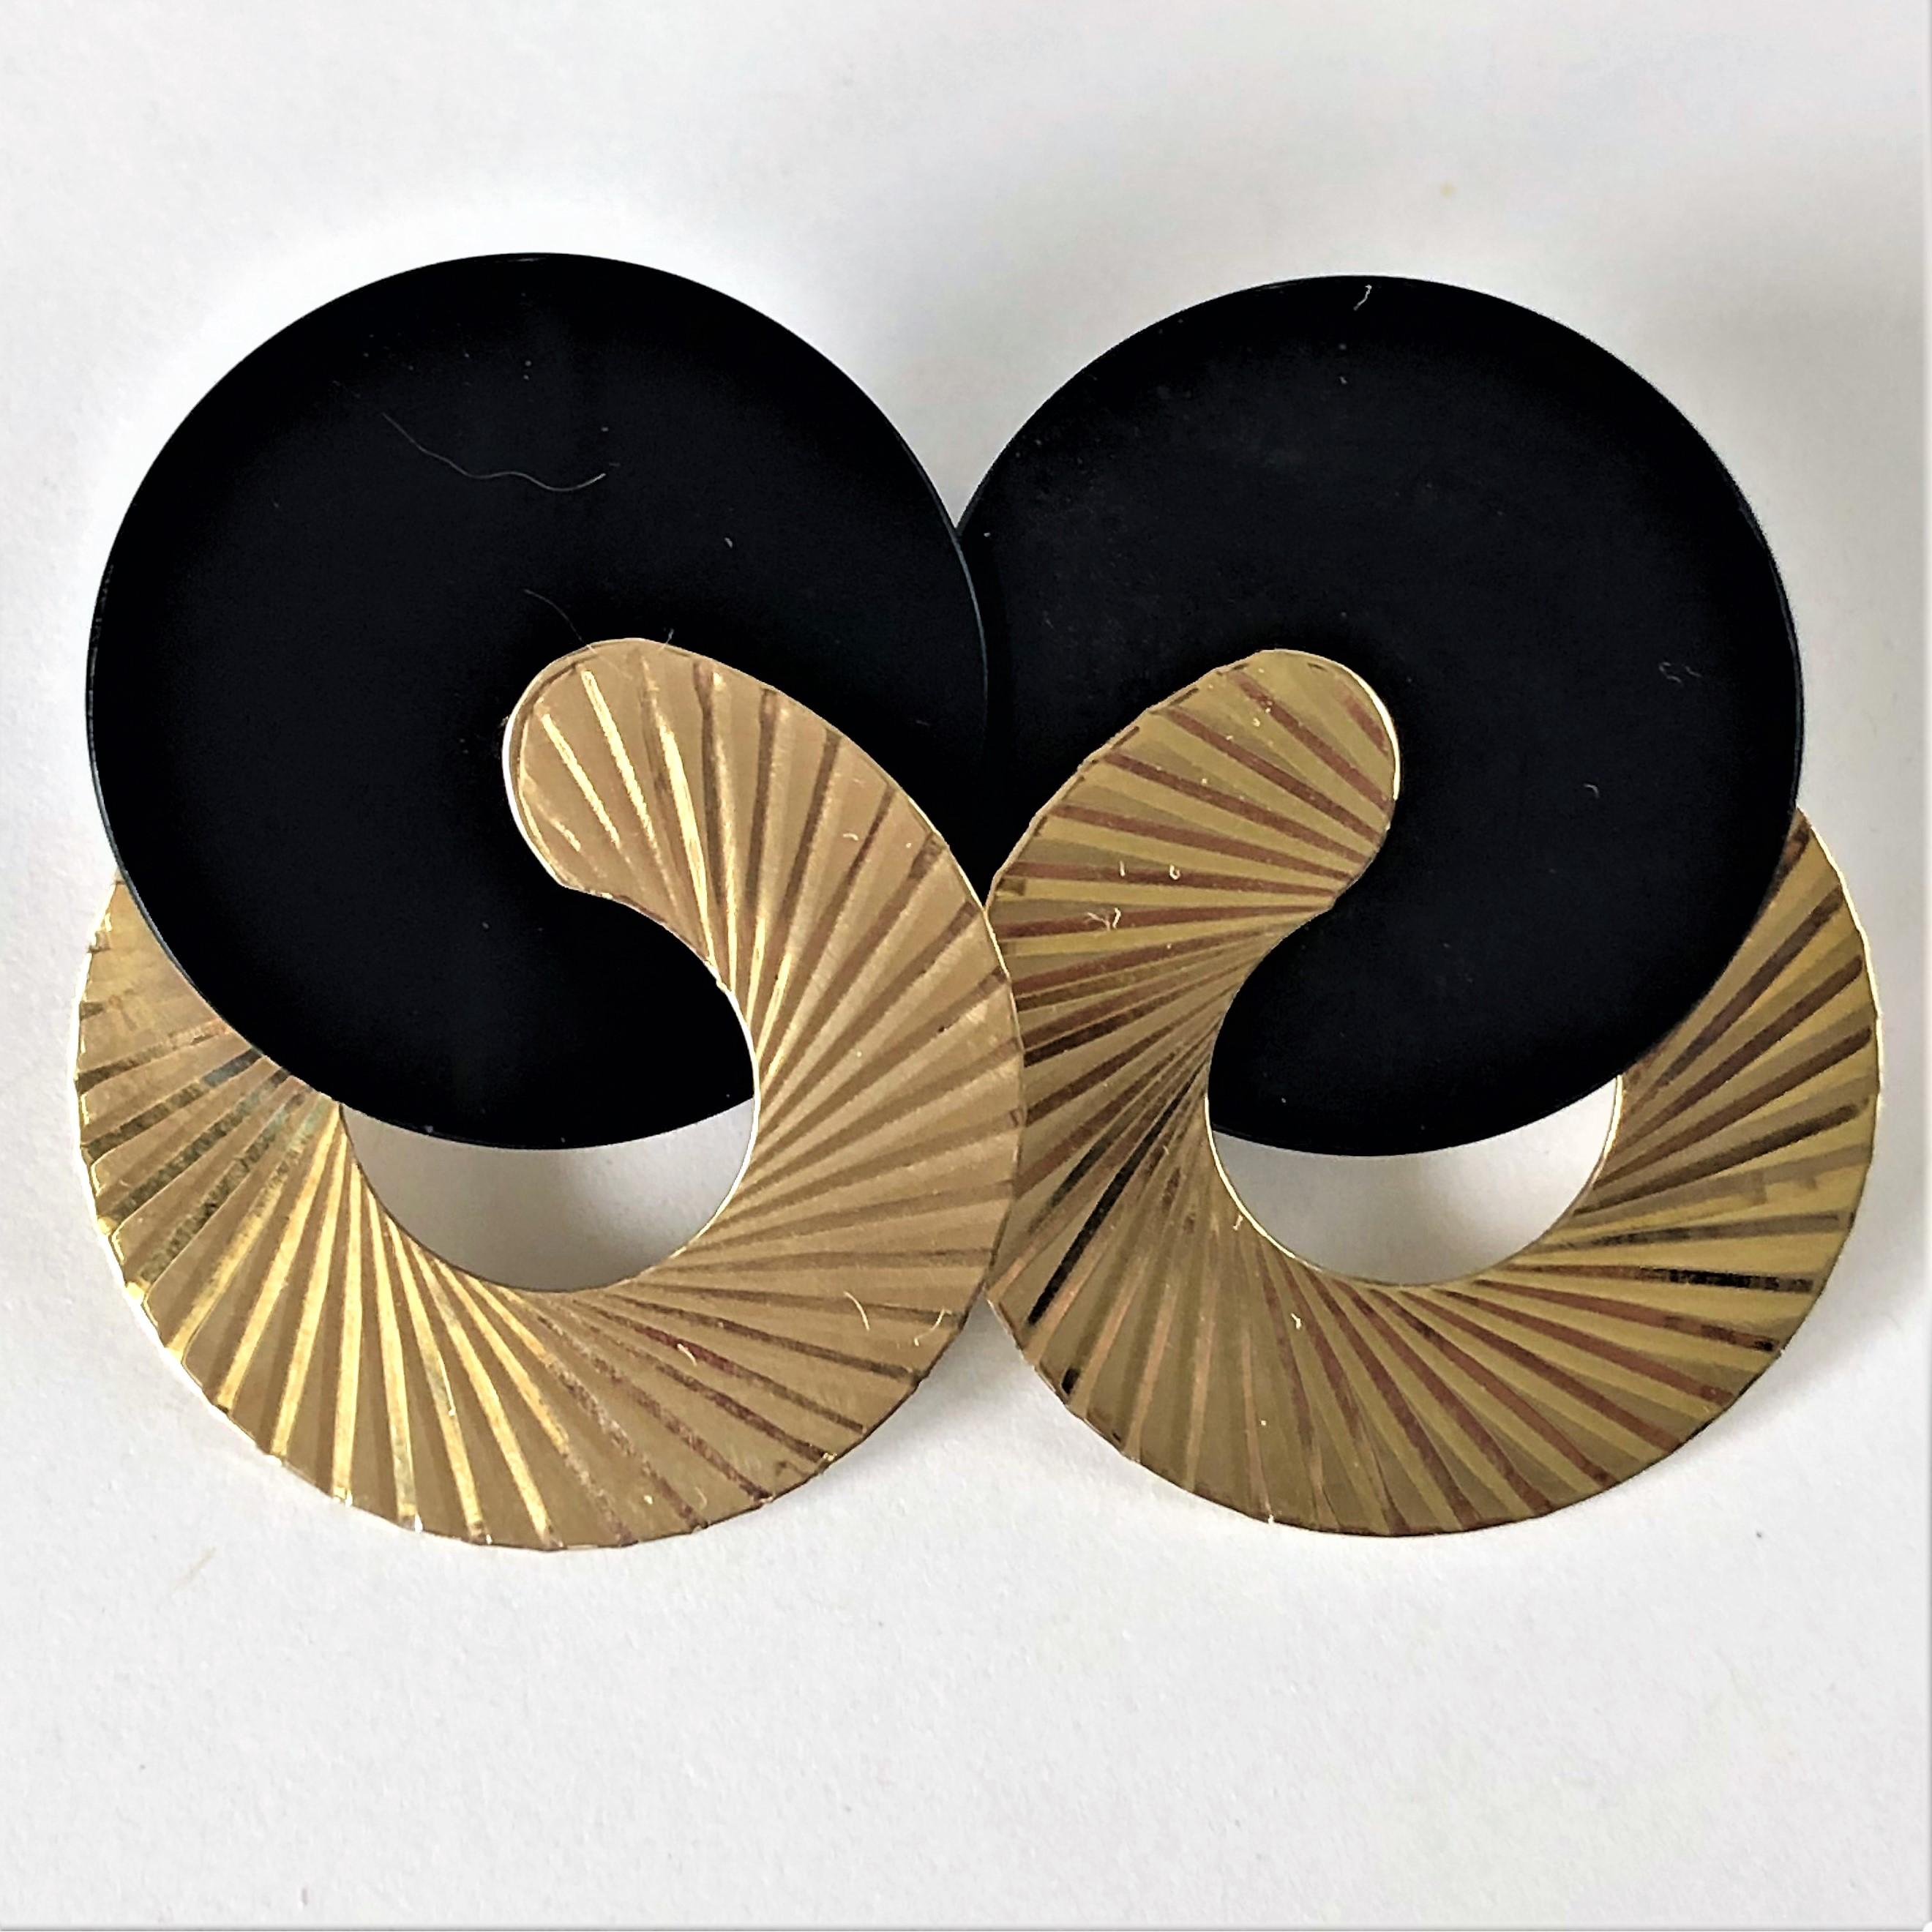 This great looking pair of modernist earrings are made up from interlocking onyx discs
and fluted 14K yellow gold discs that shimmer in the light. Each onyx disc measures 7/8 inch (22mm) in diameter and each fluted gold disc measures 15/16 inch